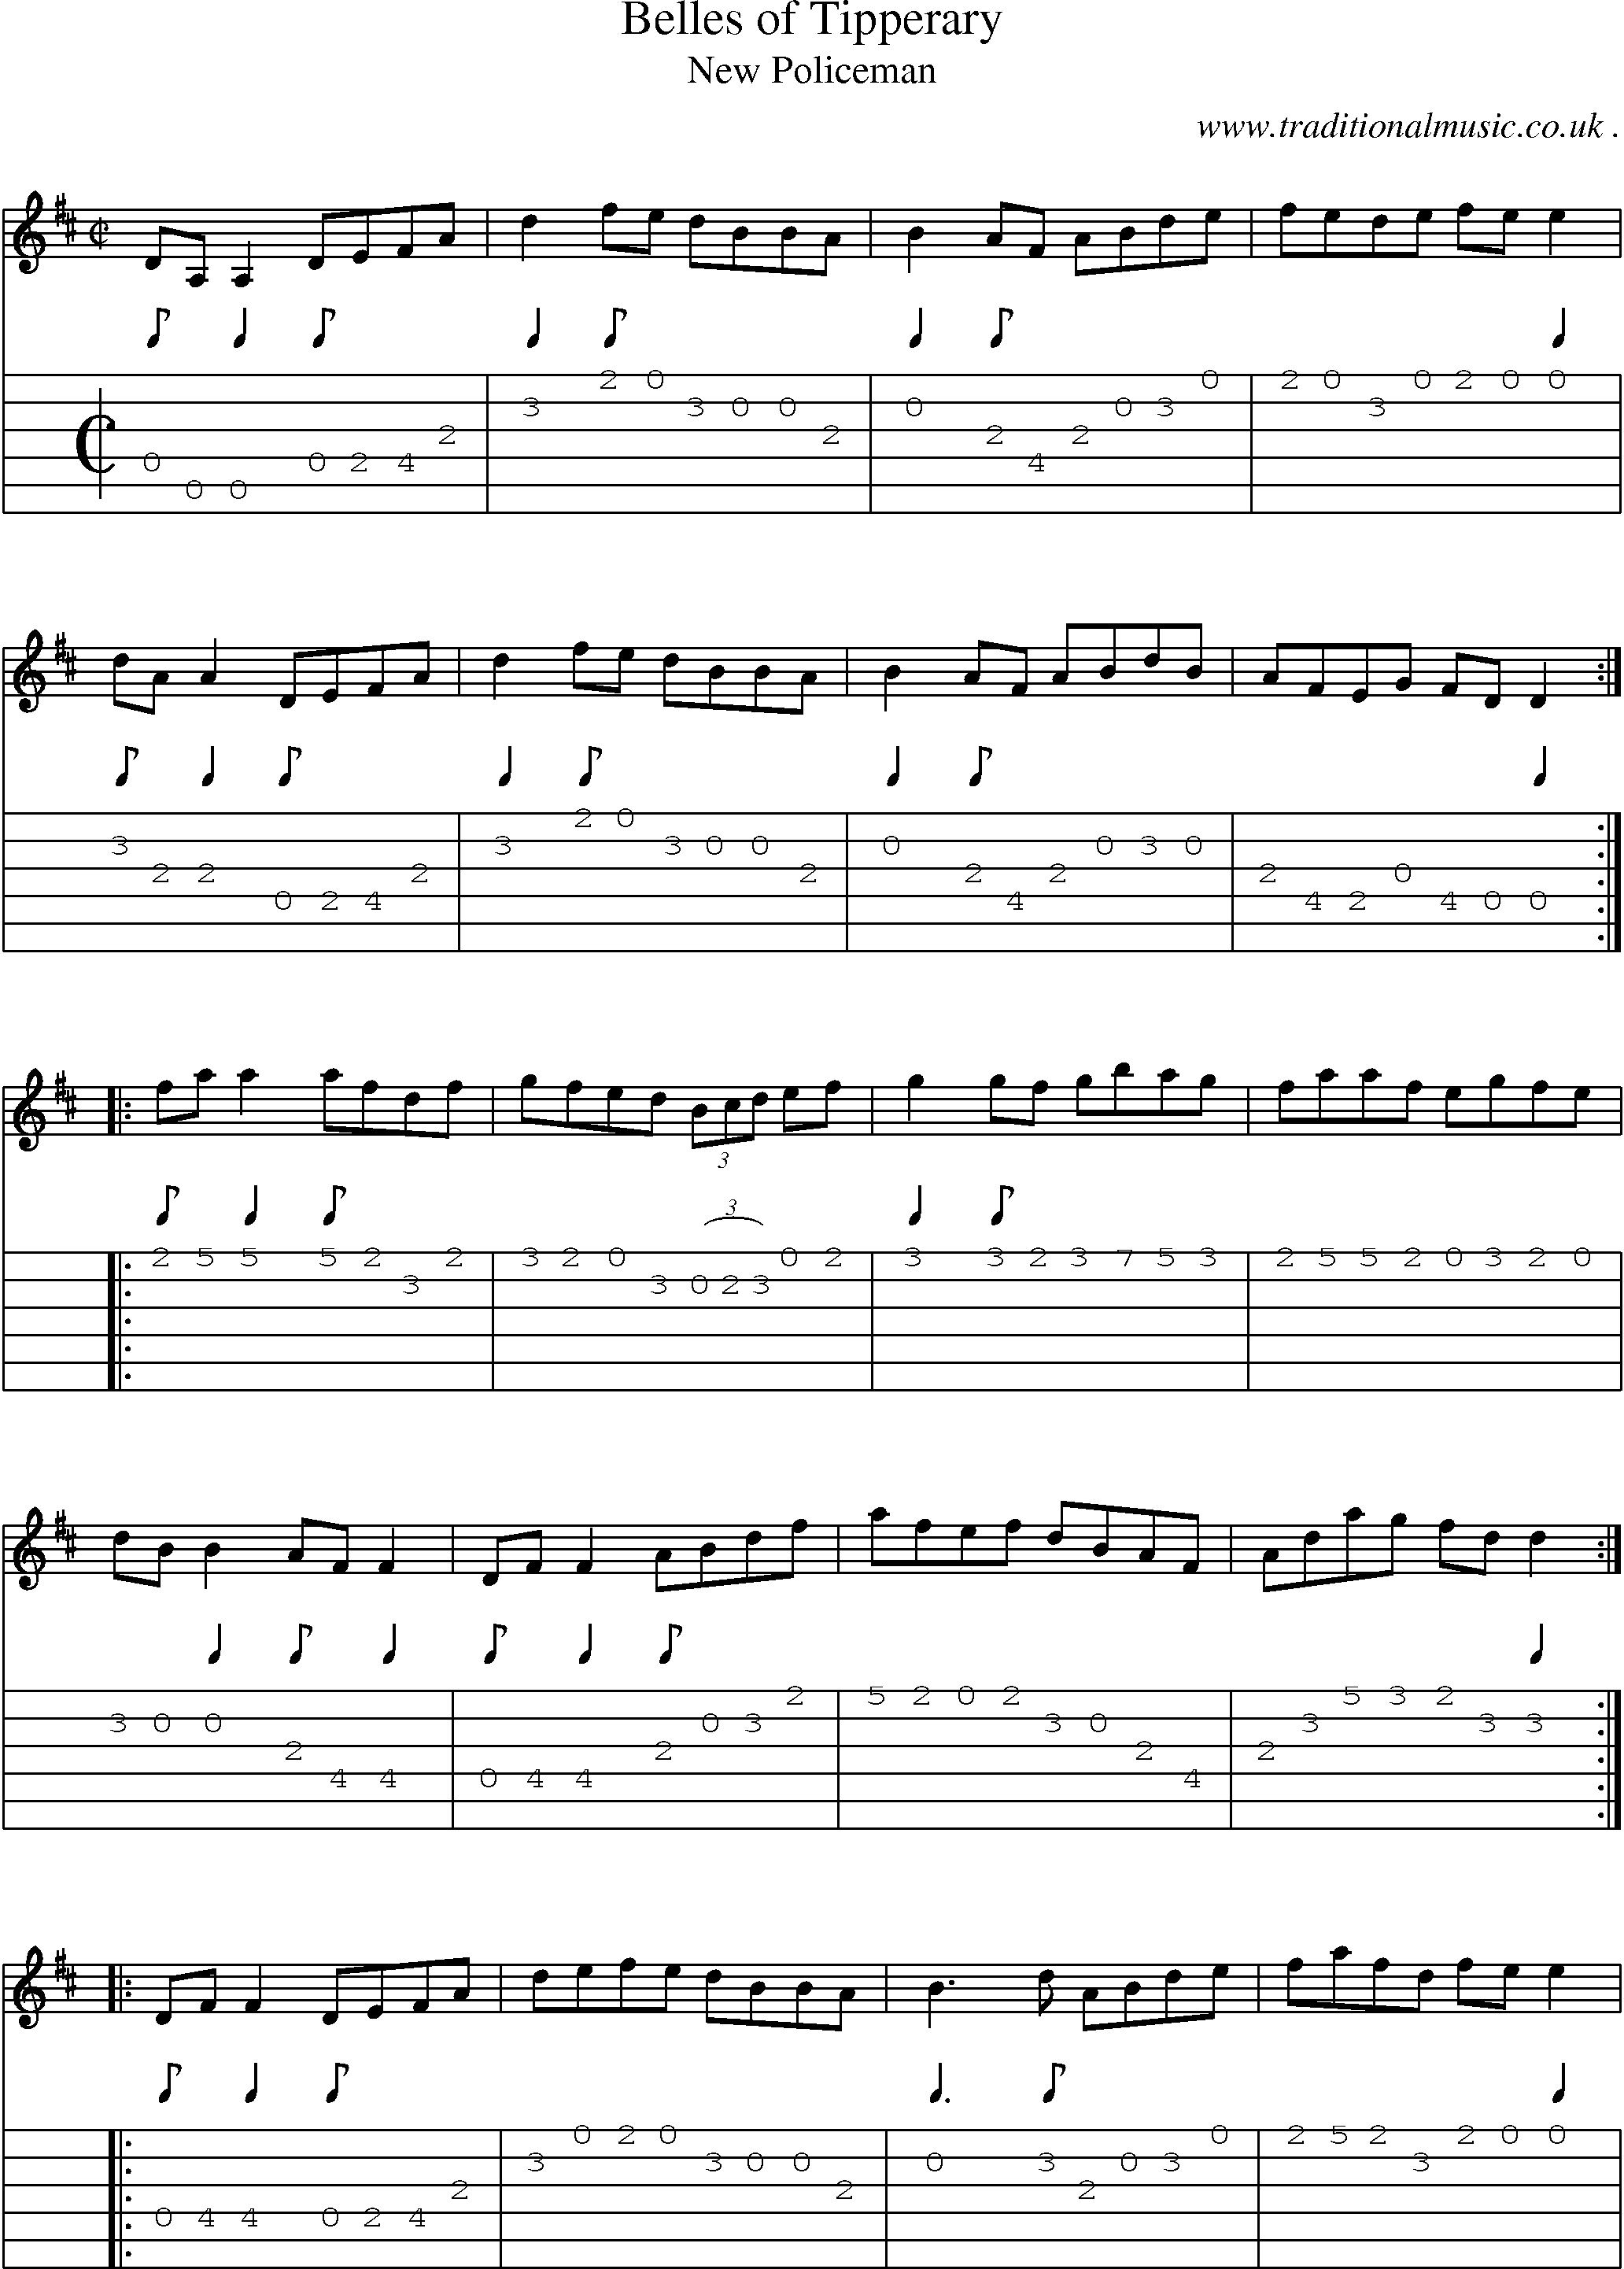 Sheet-Music and Guitar Tabs for Belles Of Tipperary